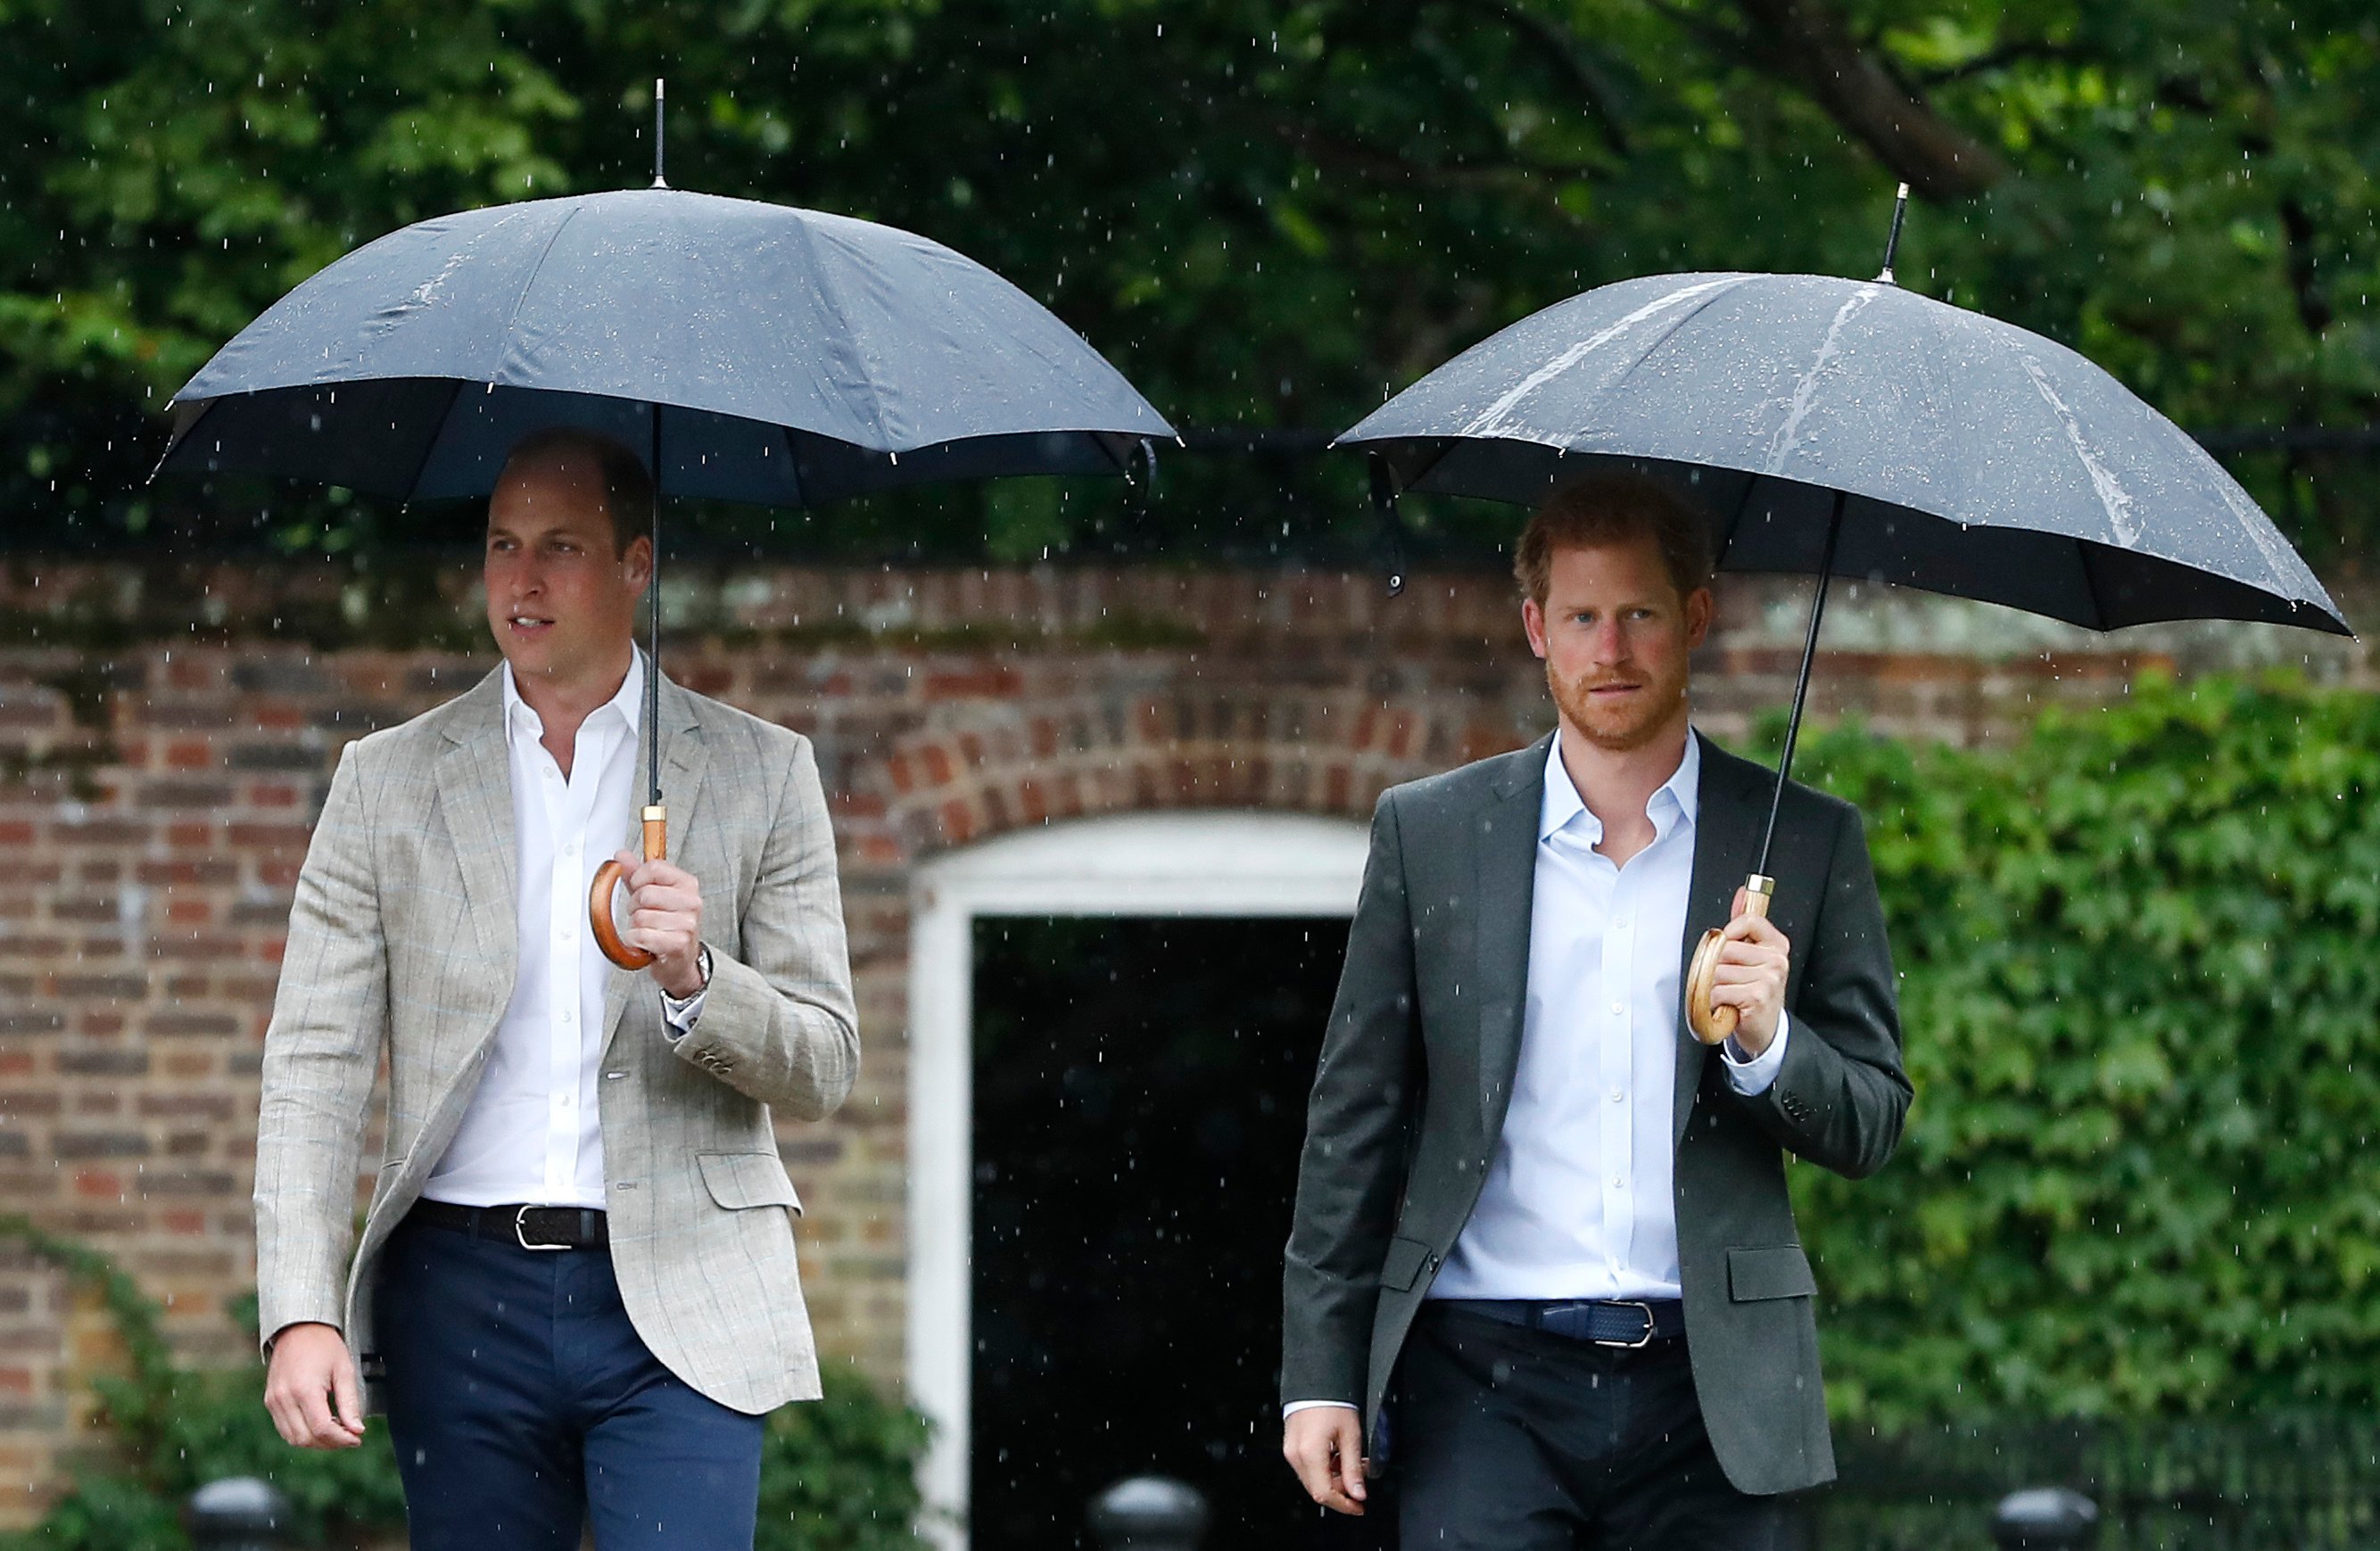 Prince Harry Was ‘Evasive’ and Showed ‘Discomfort’ When Questioned About Prince William, Says Body Language Expert